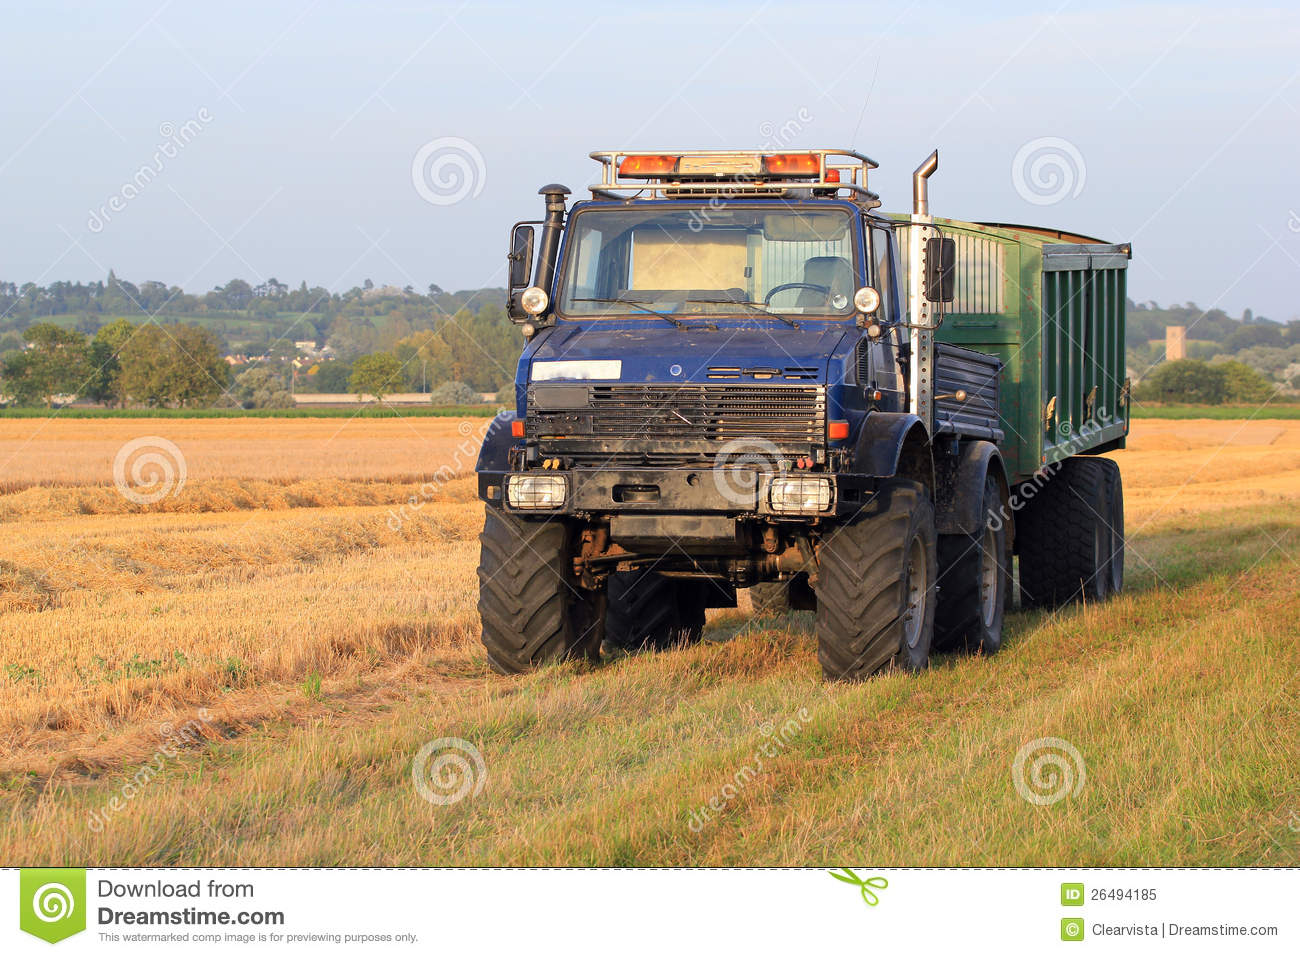 Farm Truck And Trailer Royalty Free Stock Photo   Image  26494185